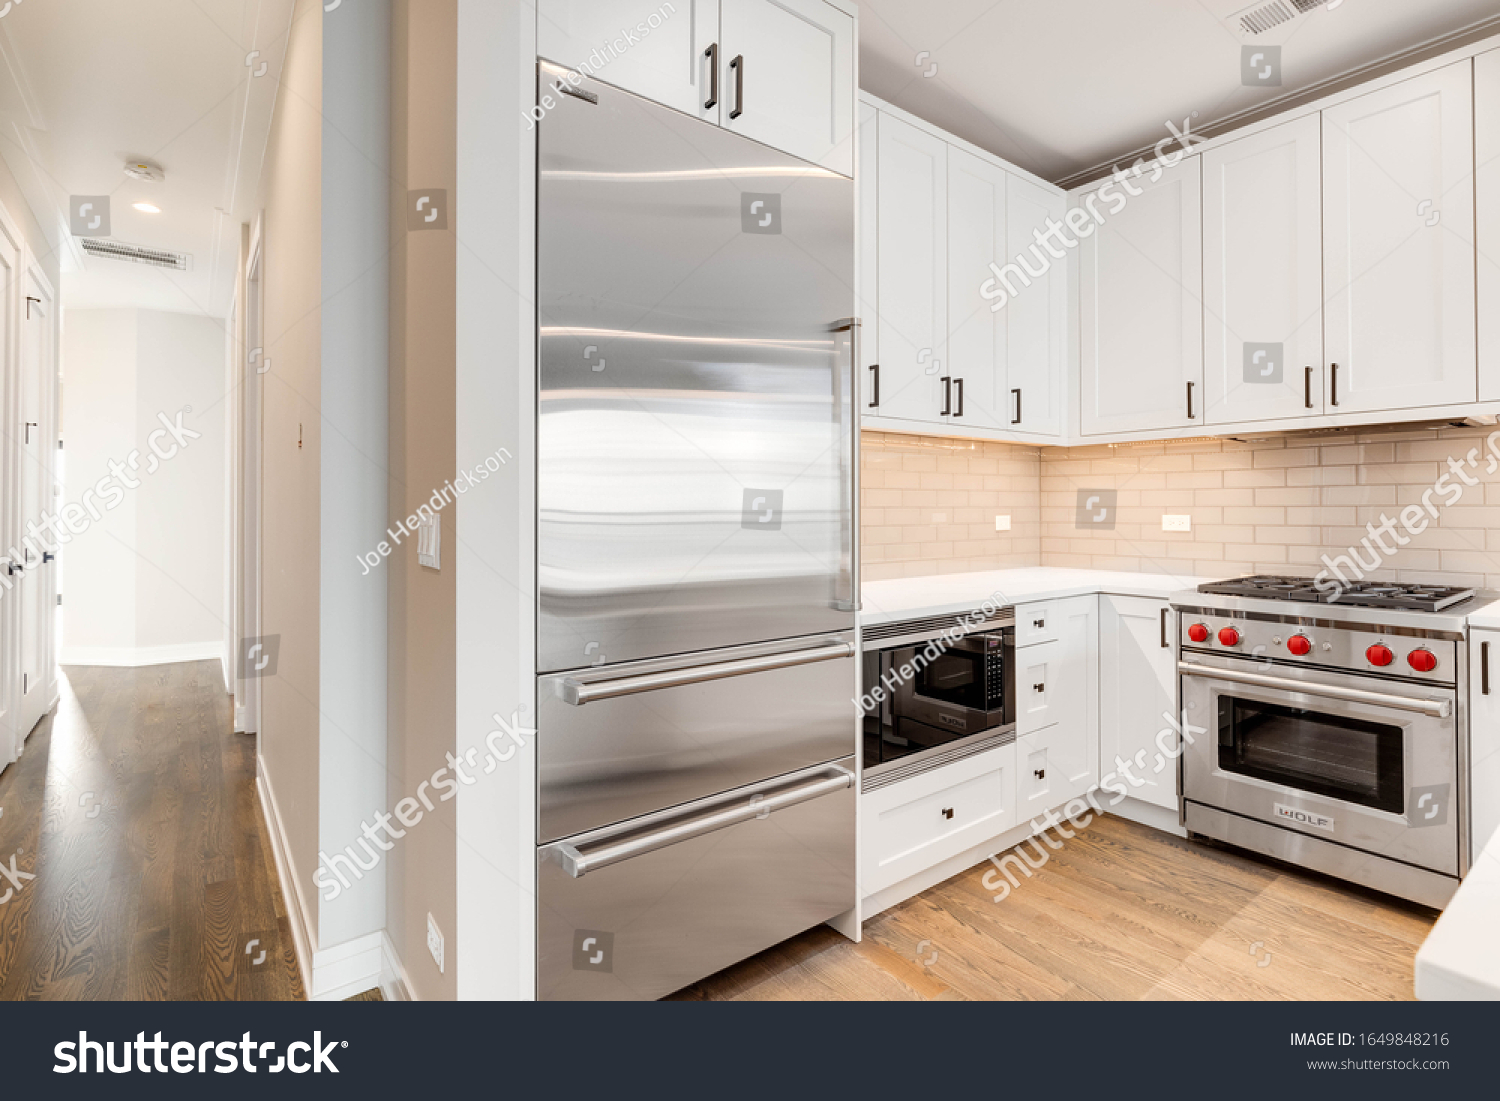 Stock Photo Chicago Il Usa January A Modern All White Kitchen In A Downtown Condominium With 1649848216 